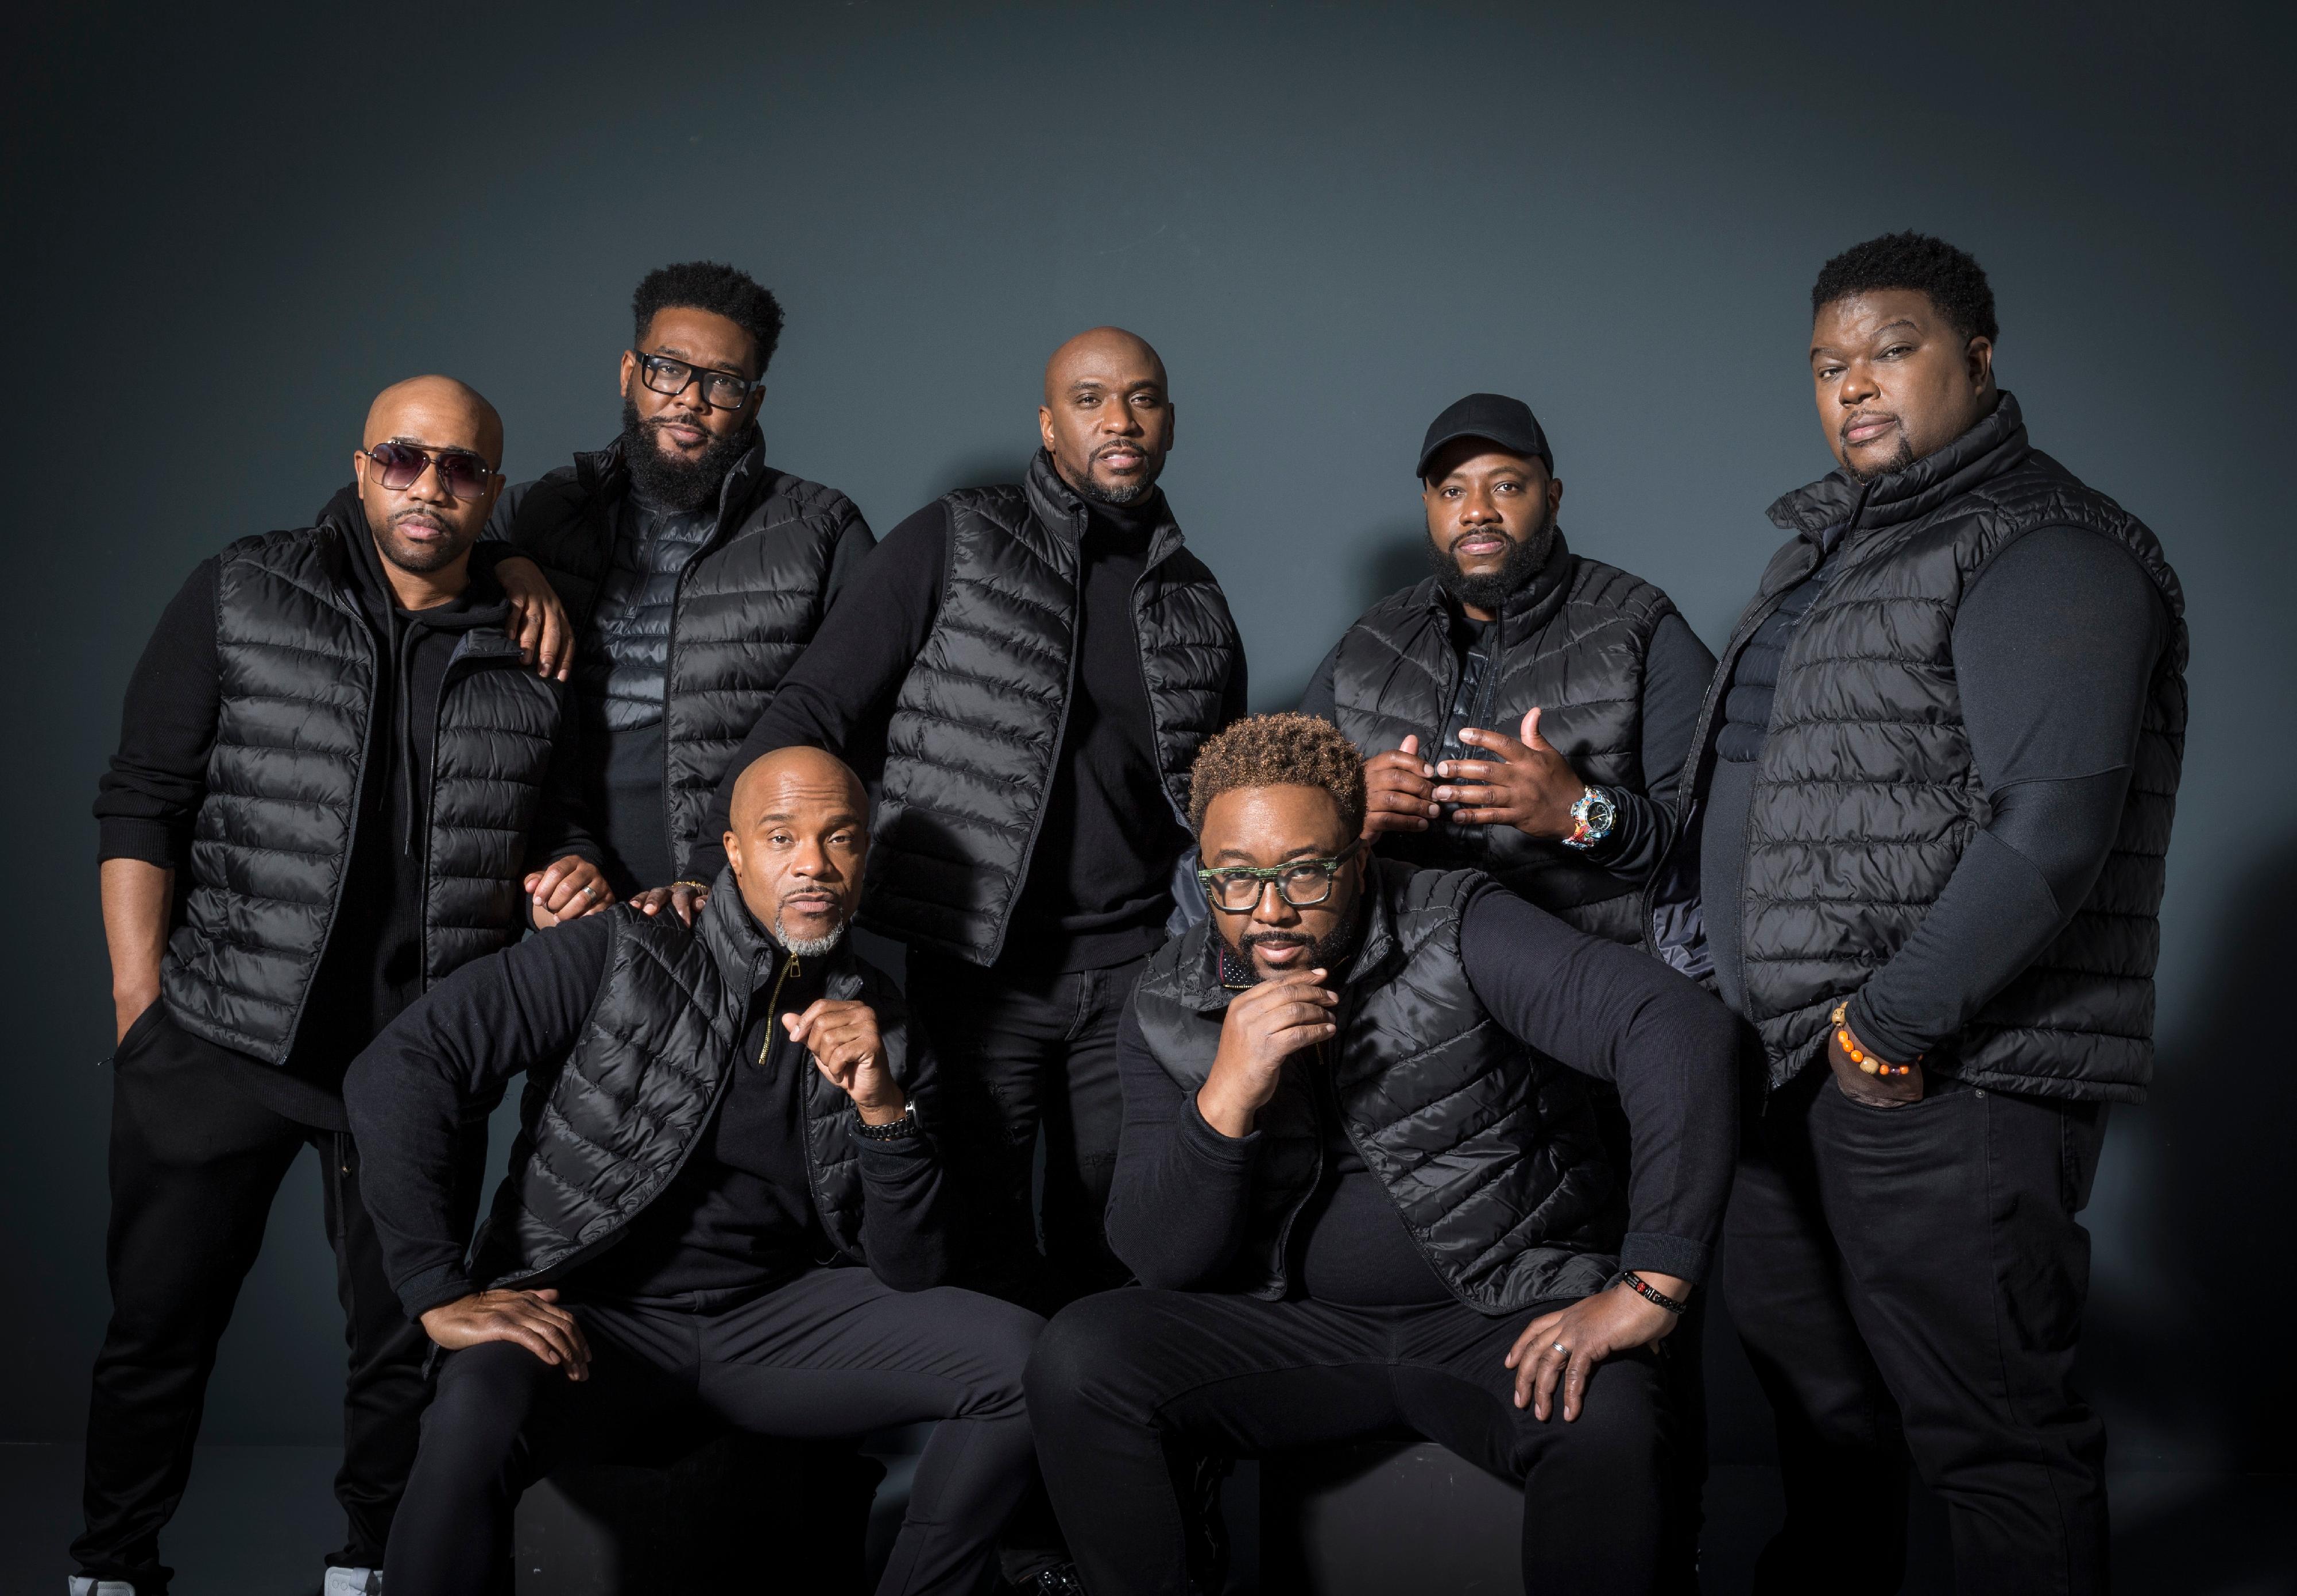 American a cappella group Naturally 7 will hold an a cappella concert in Hong Kong in late September this year under the Leisure and Cultural Services Department's Great Music 2023. Photo shows Naturally 7. (Photo: Nina Siber)